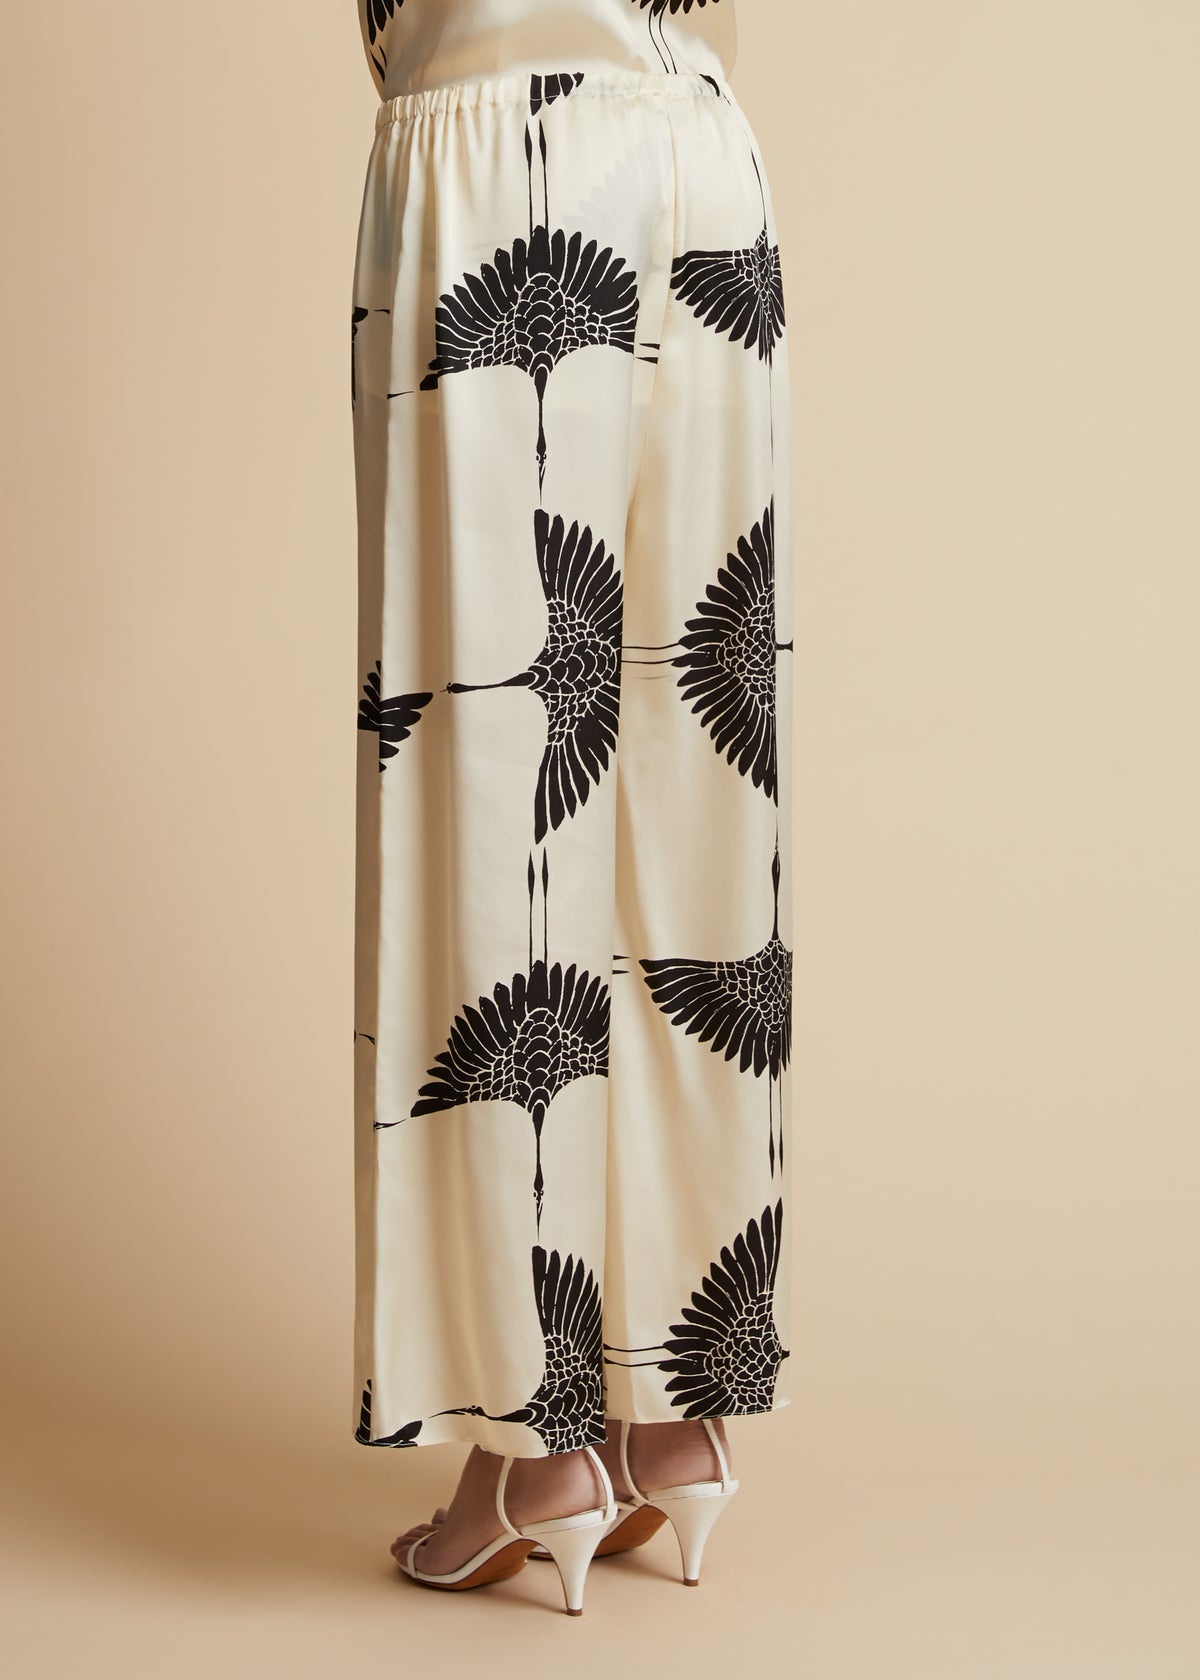 The Mindy Pant in Cream and Black Crane Print - 3